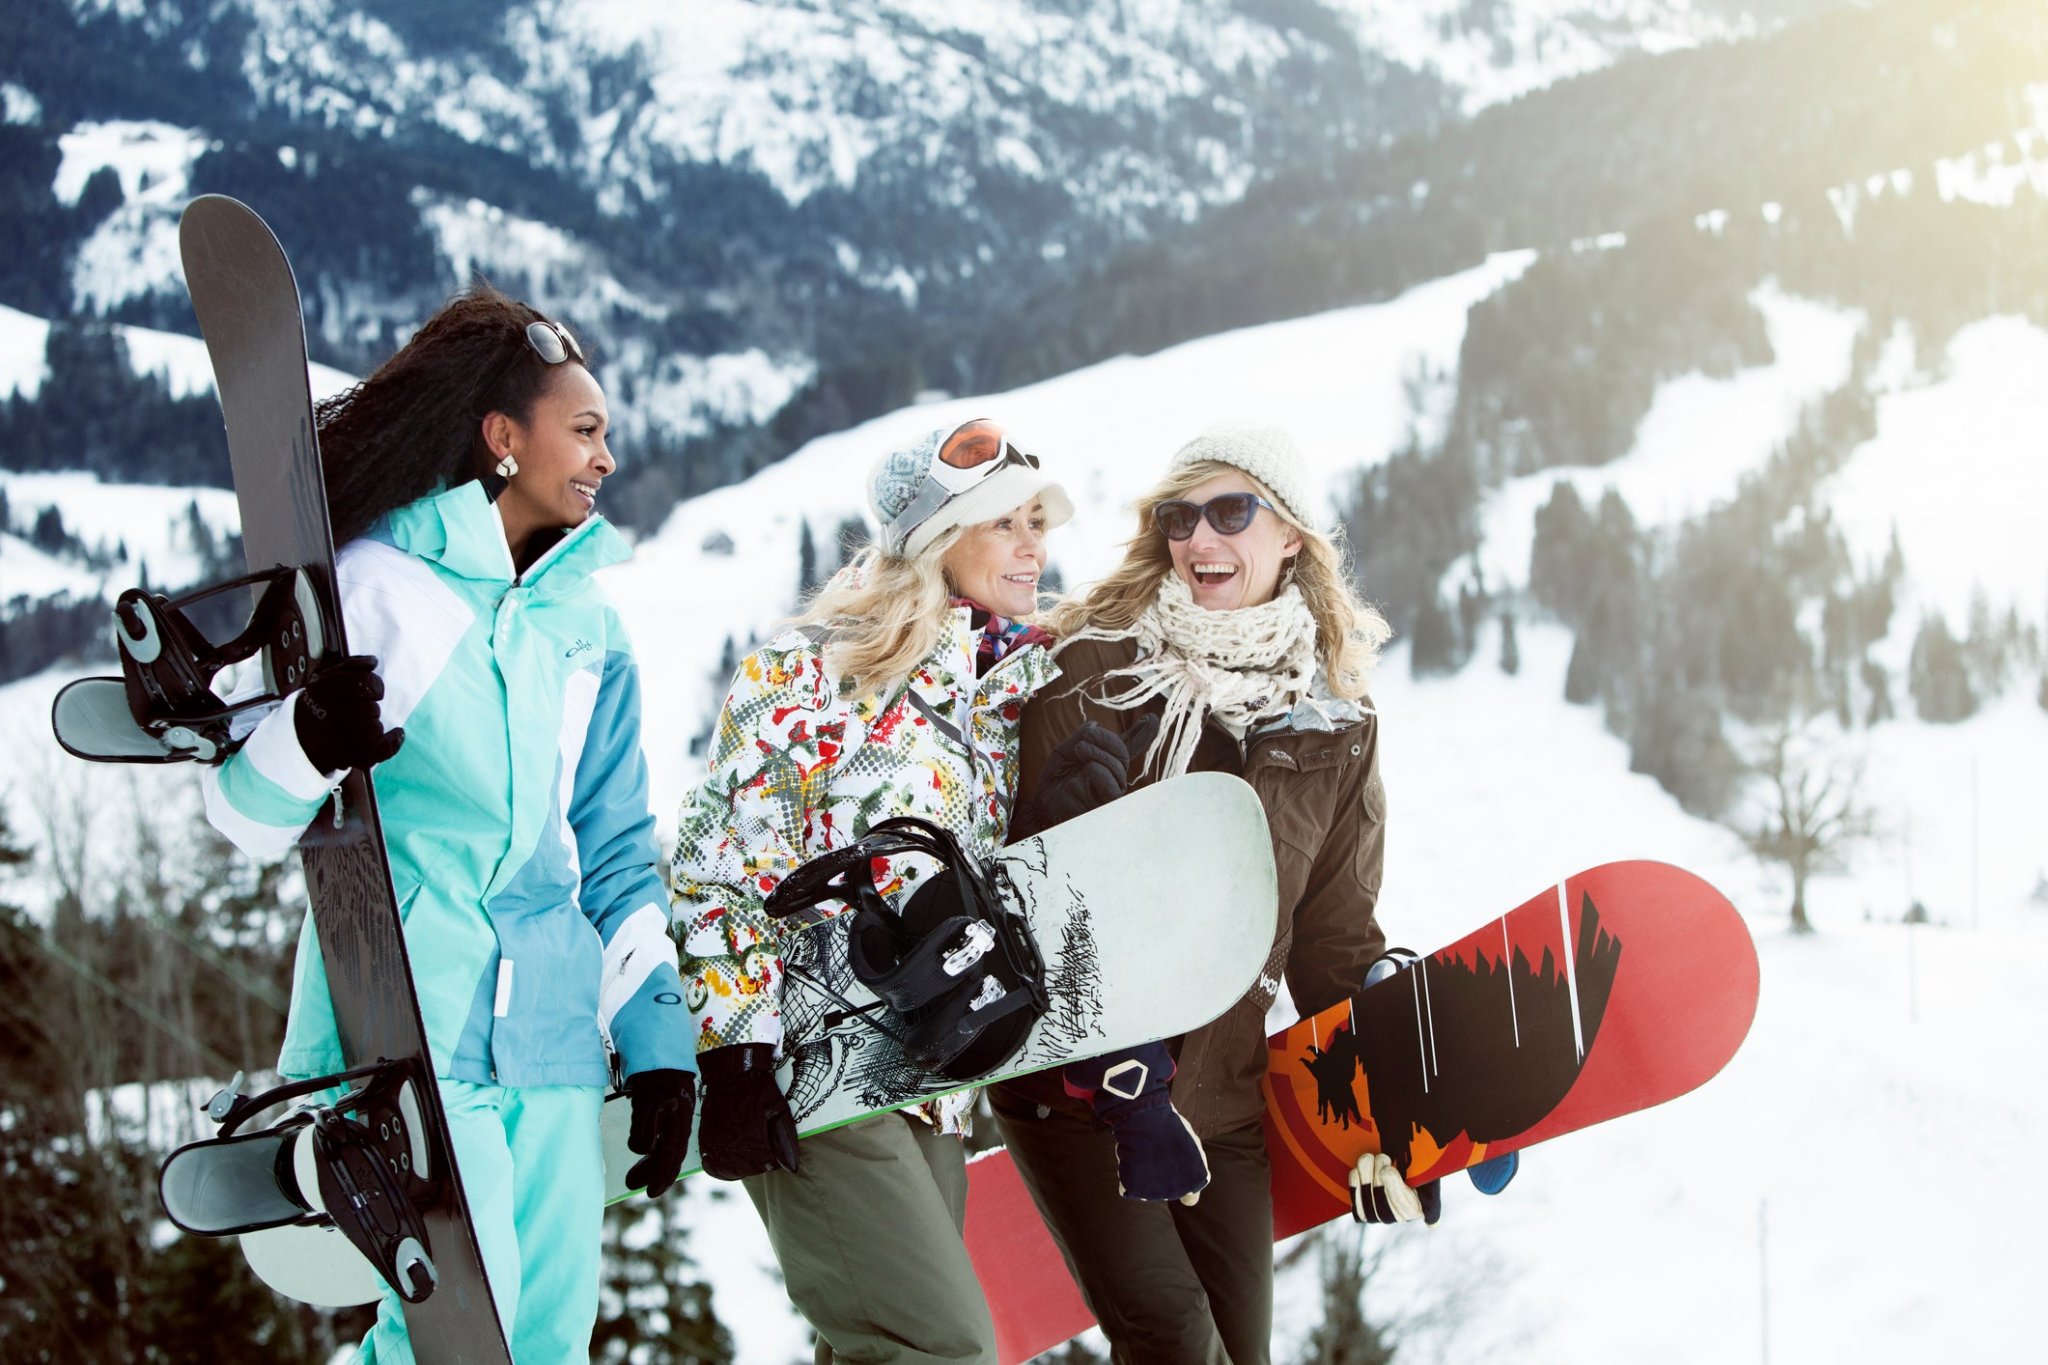 7 ways to make your next ski trip better than the last